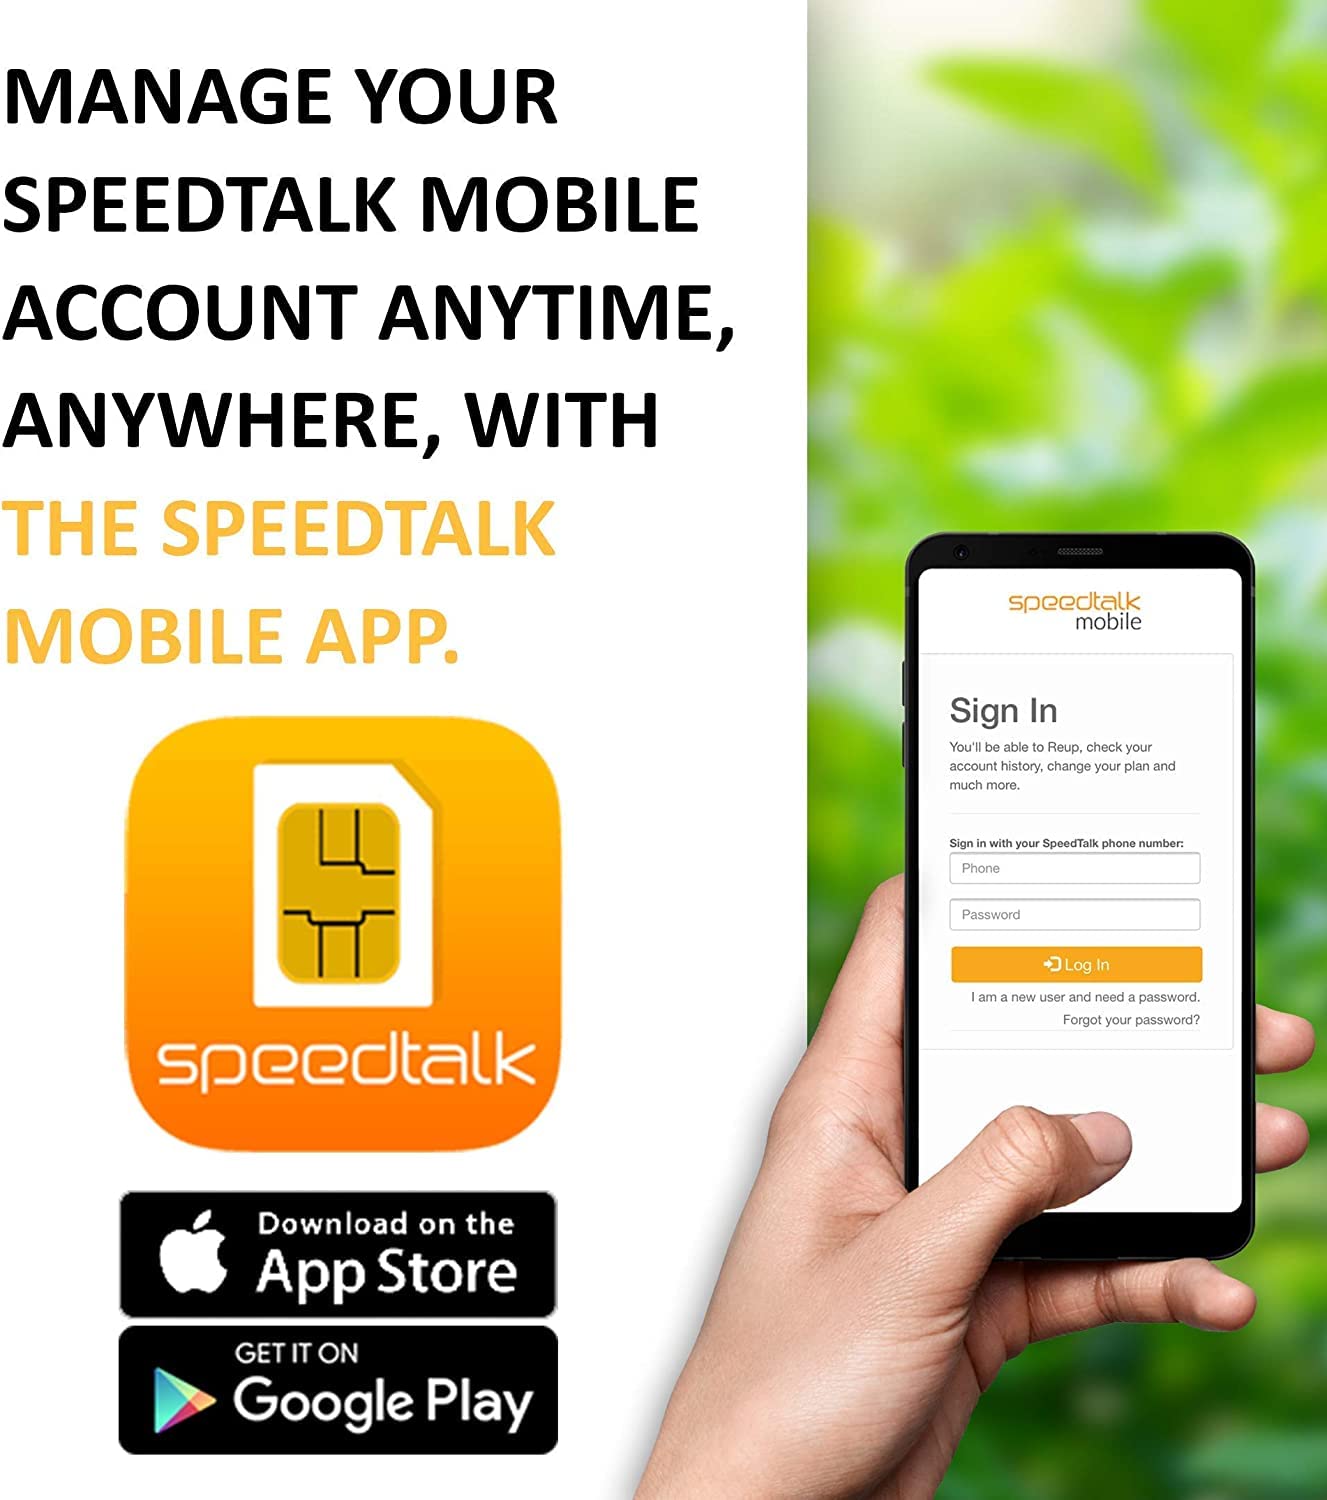 SpeedTalk Mobile Cellular Plan for Smart Phones & Cellphones - Unlimited Talk & Text + 500 MB Data - 5G/4G/LTE Nationwide Coverage - 30 Day Service - Universal SIM Card Included